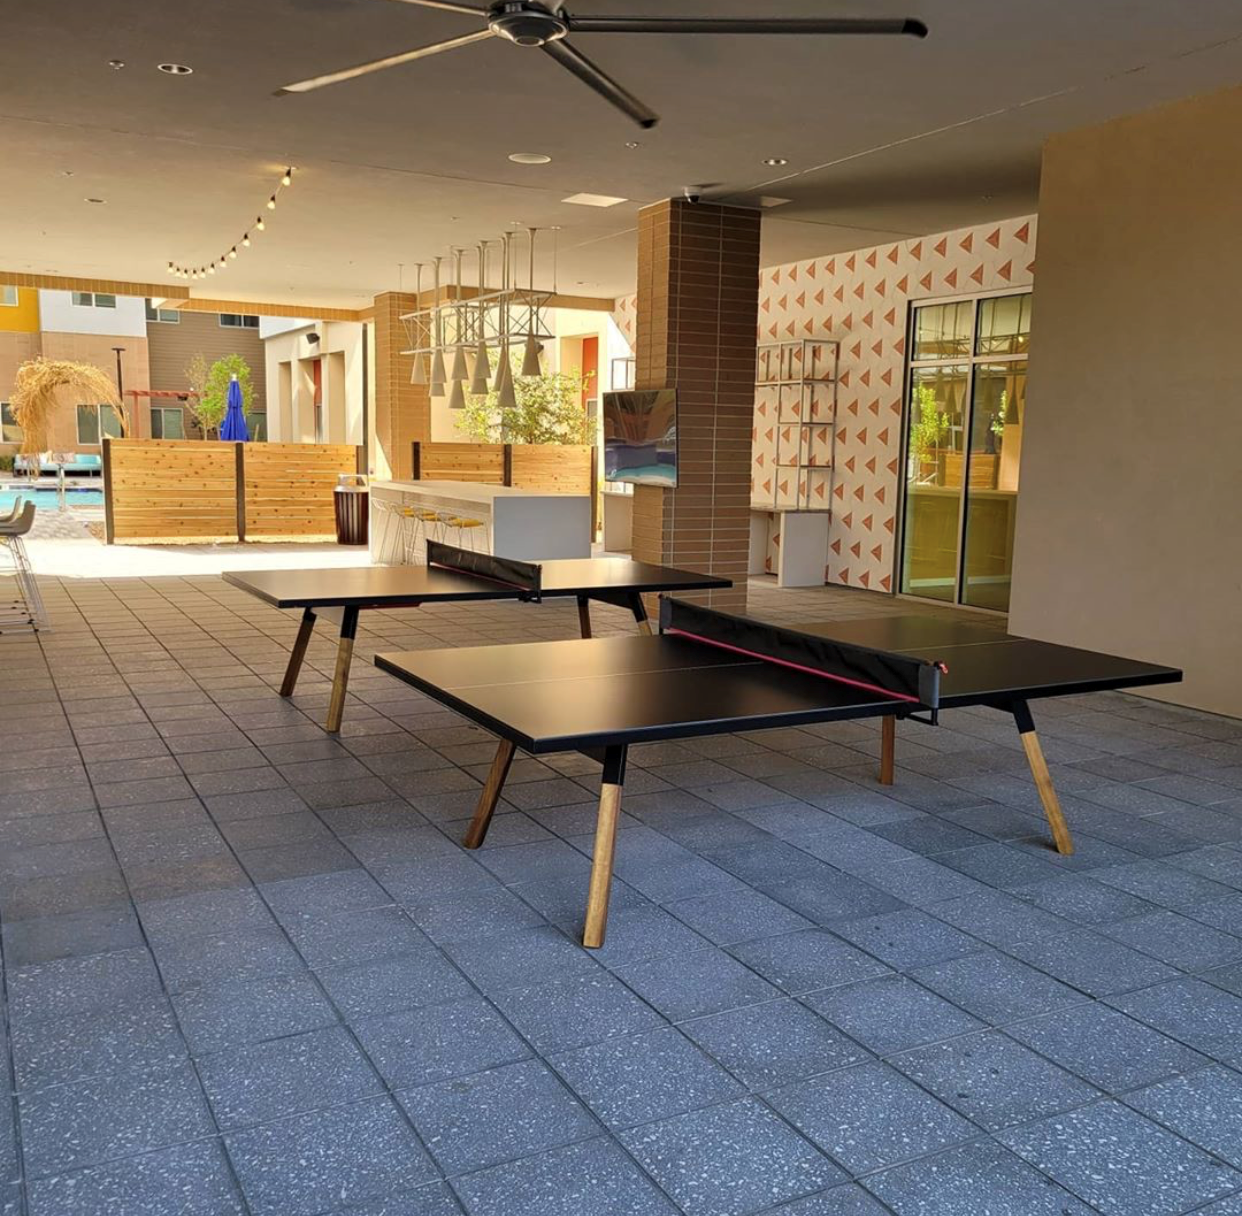 You and Me 180 ping pong table for outdoor use